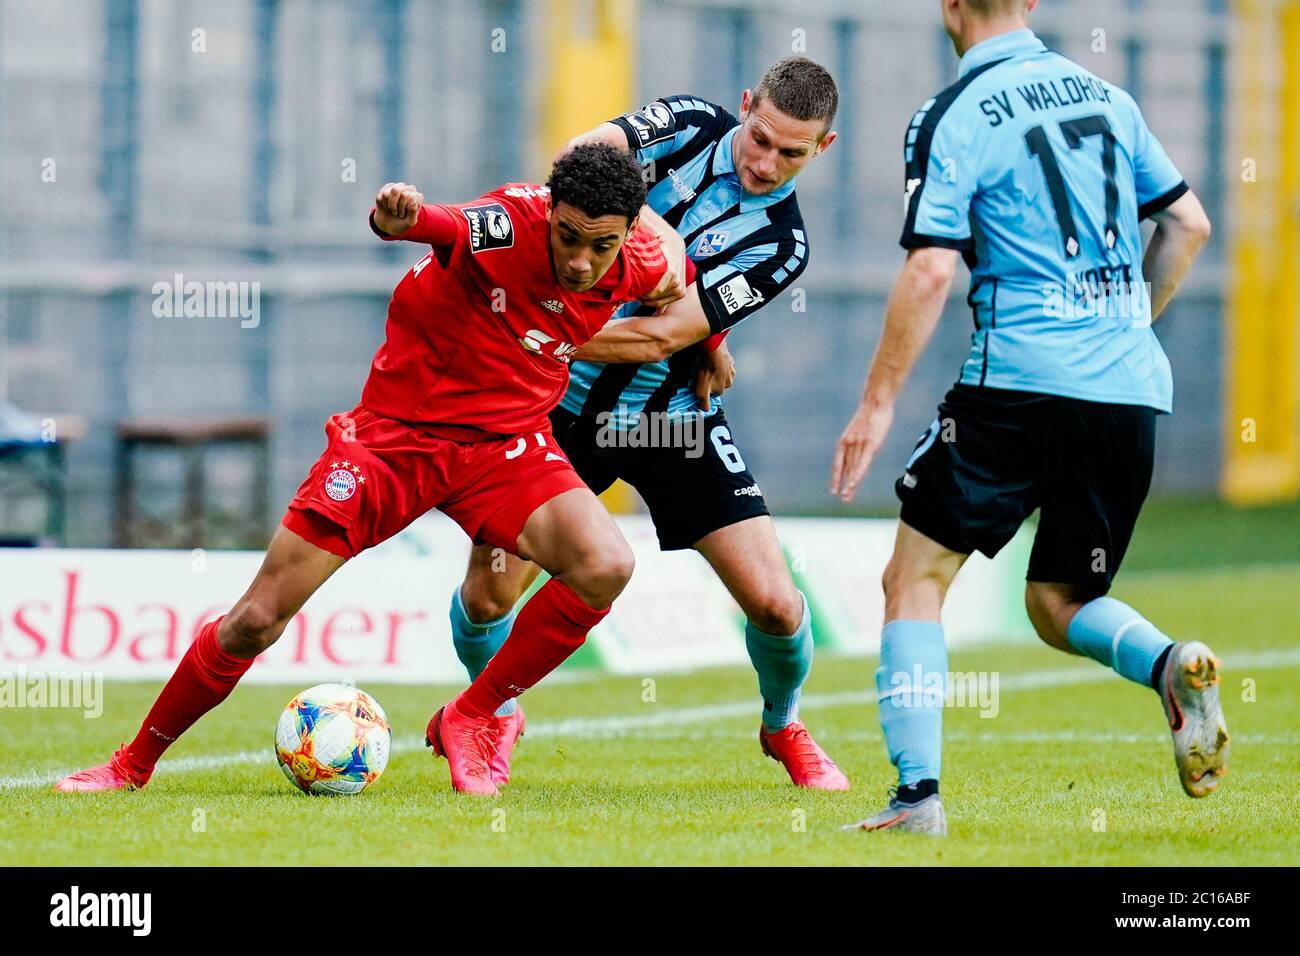 Mannheim, Germany. 14th June, 2020. Football: 3rd division, SV Waldhof  Mannheim - Bayern Munich II, 32nd matchday, at the Carl-Benz stadium.  Munich's Jamal Musiala (l) and Mannheim's Marco Schuster fight for the